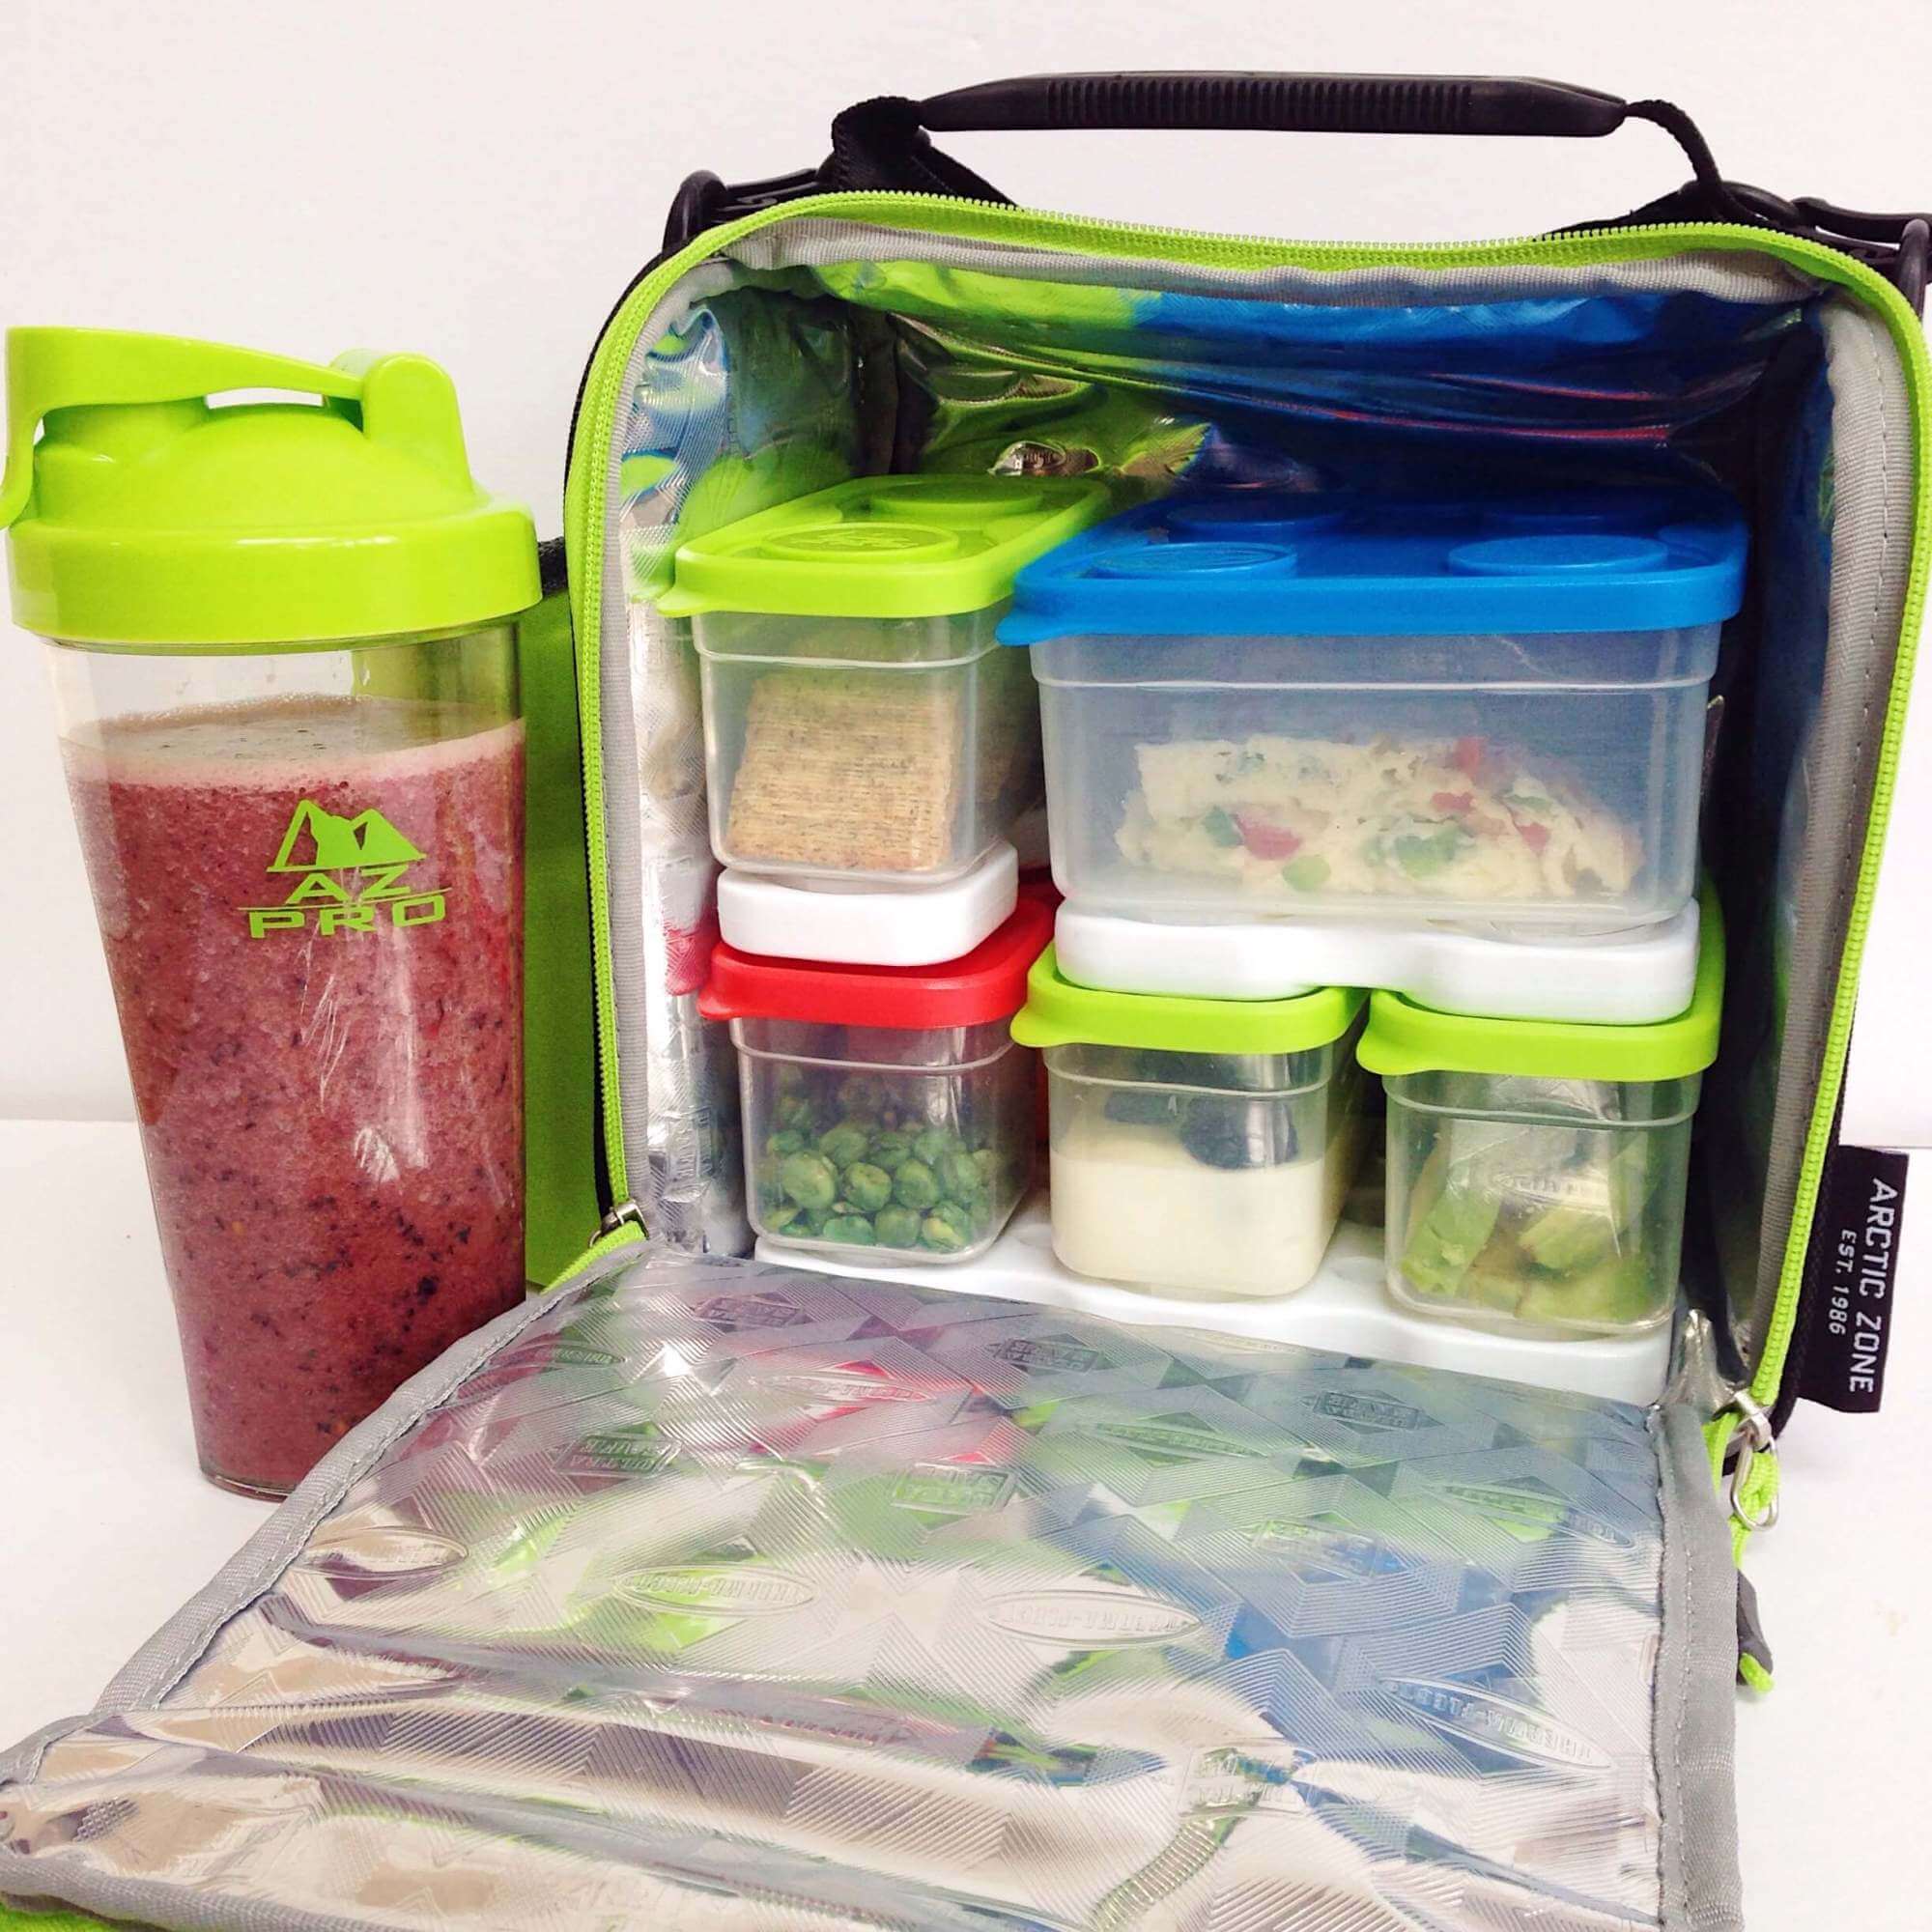 How to use the AZ Pro Portion Control Fuel Pack – My 5-Day Food Diary